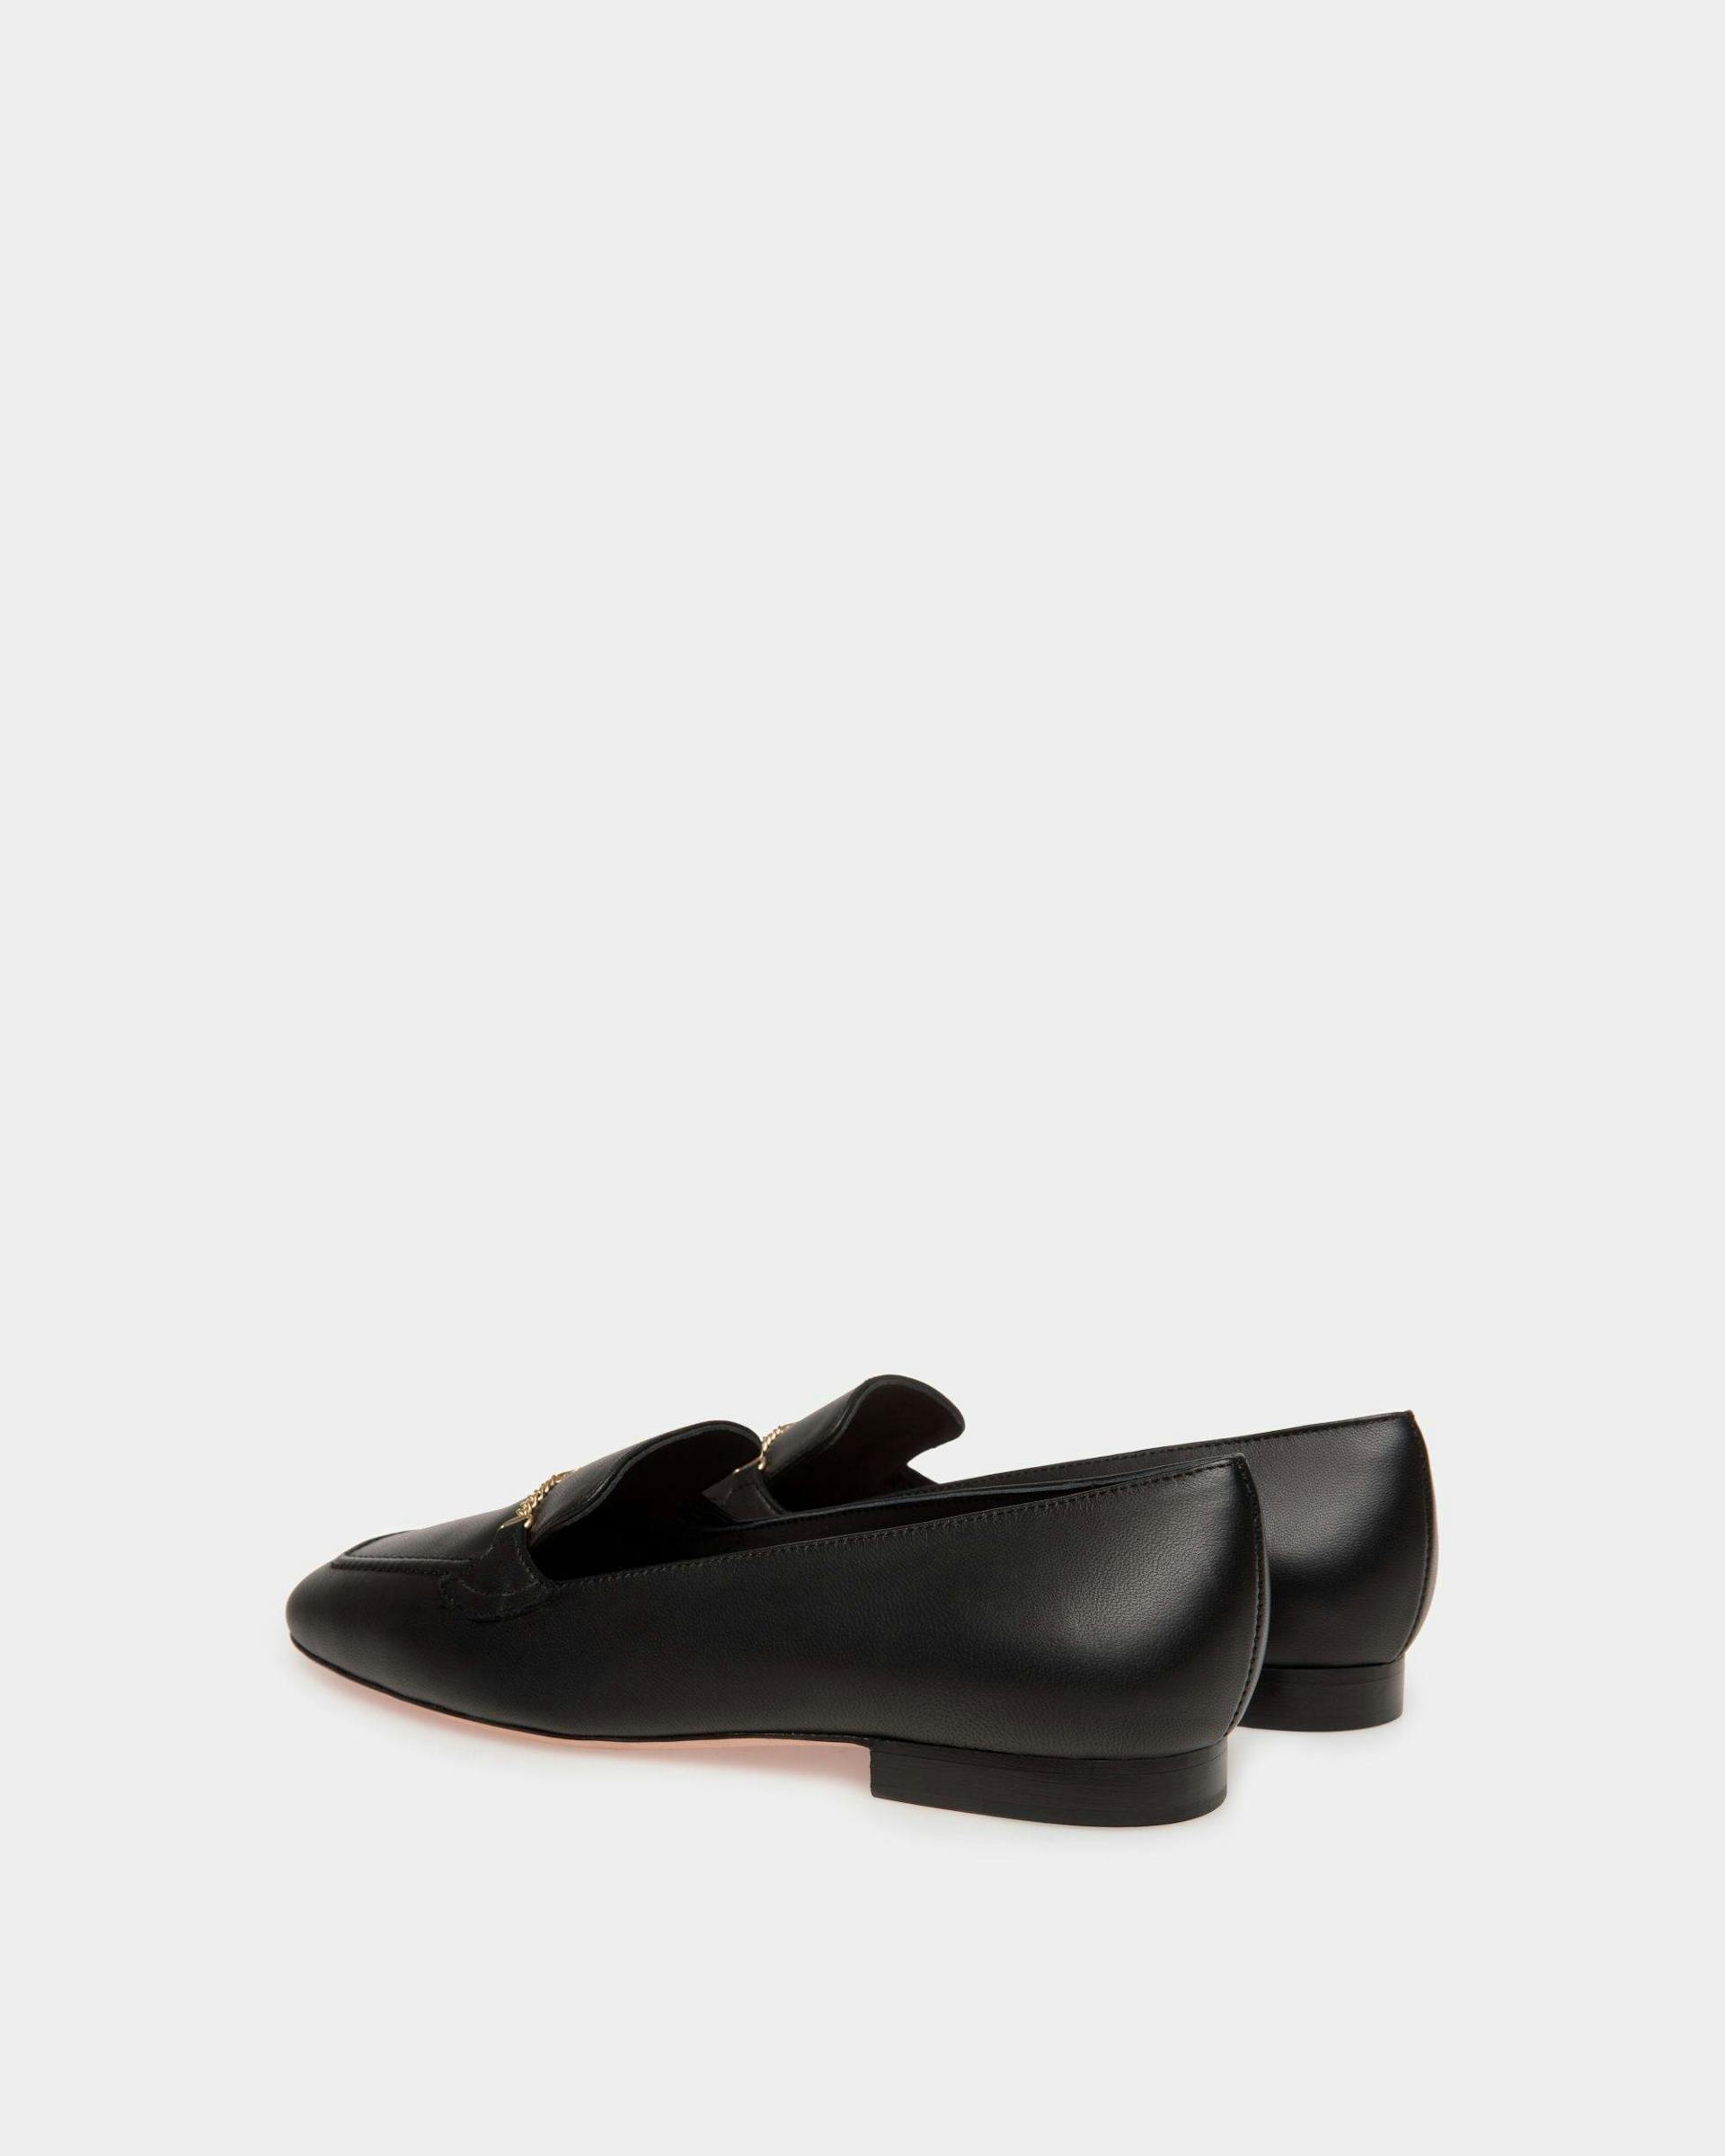 Women's Daily Emblem Loafer in Black Leather | Bally | Still Life 3/4 Back